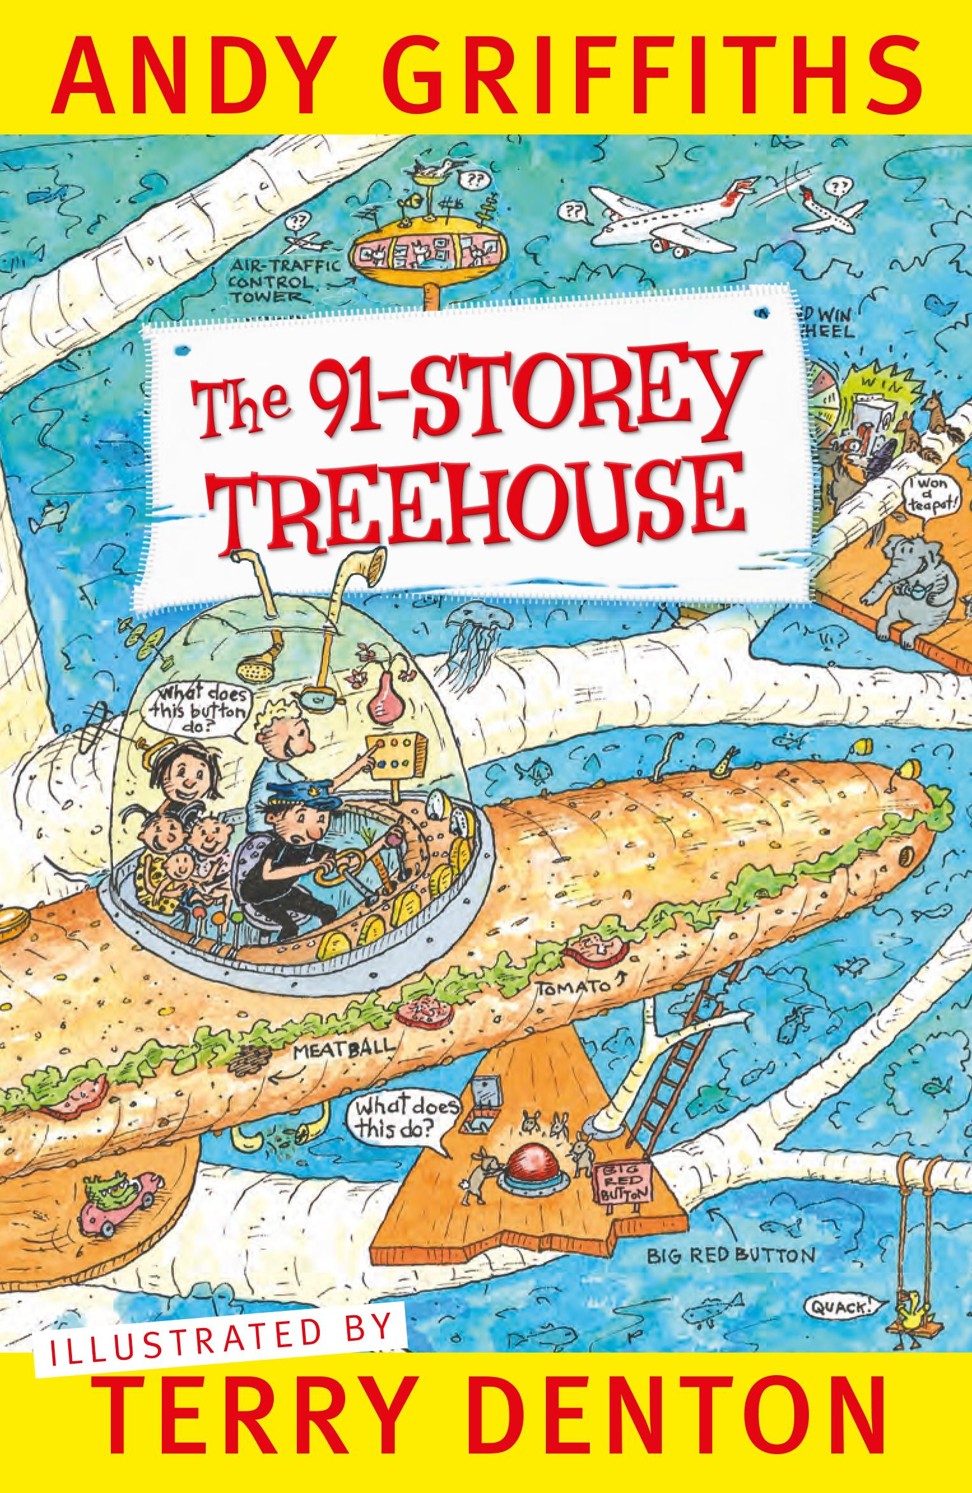 91-Storey Treehouse by Andy Griffiths.